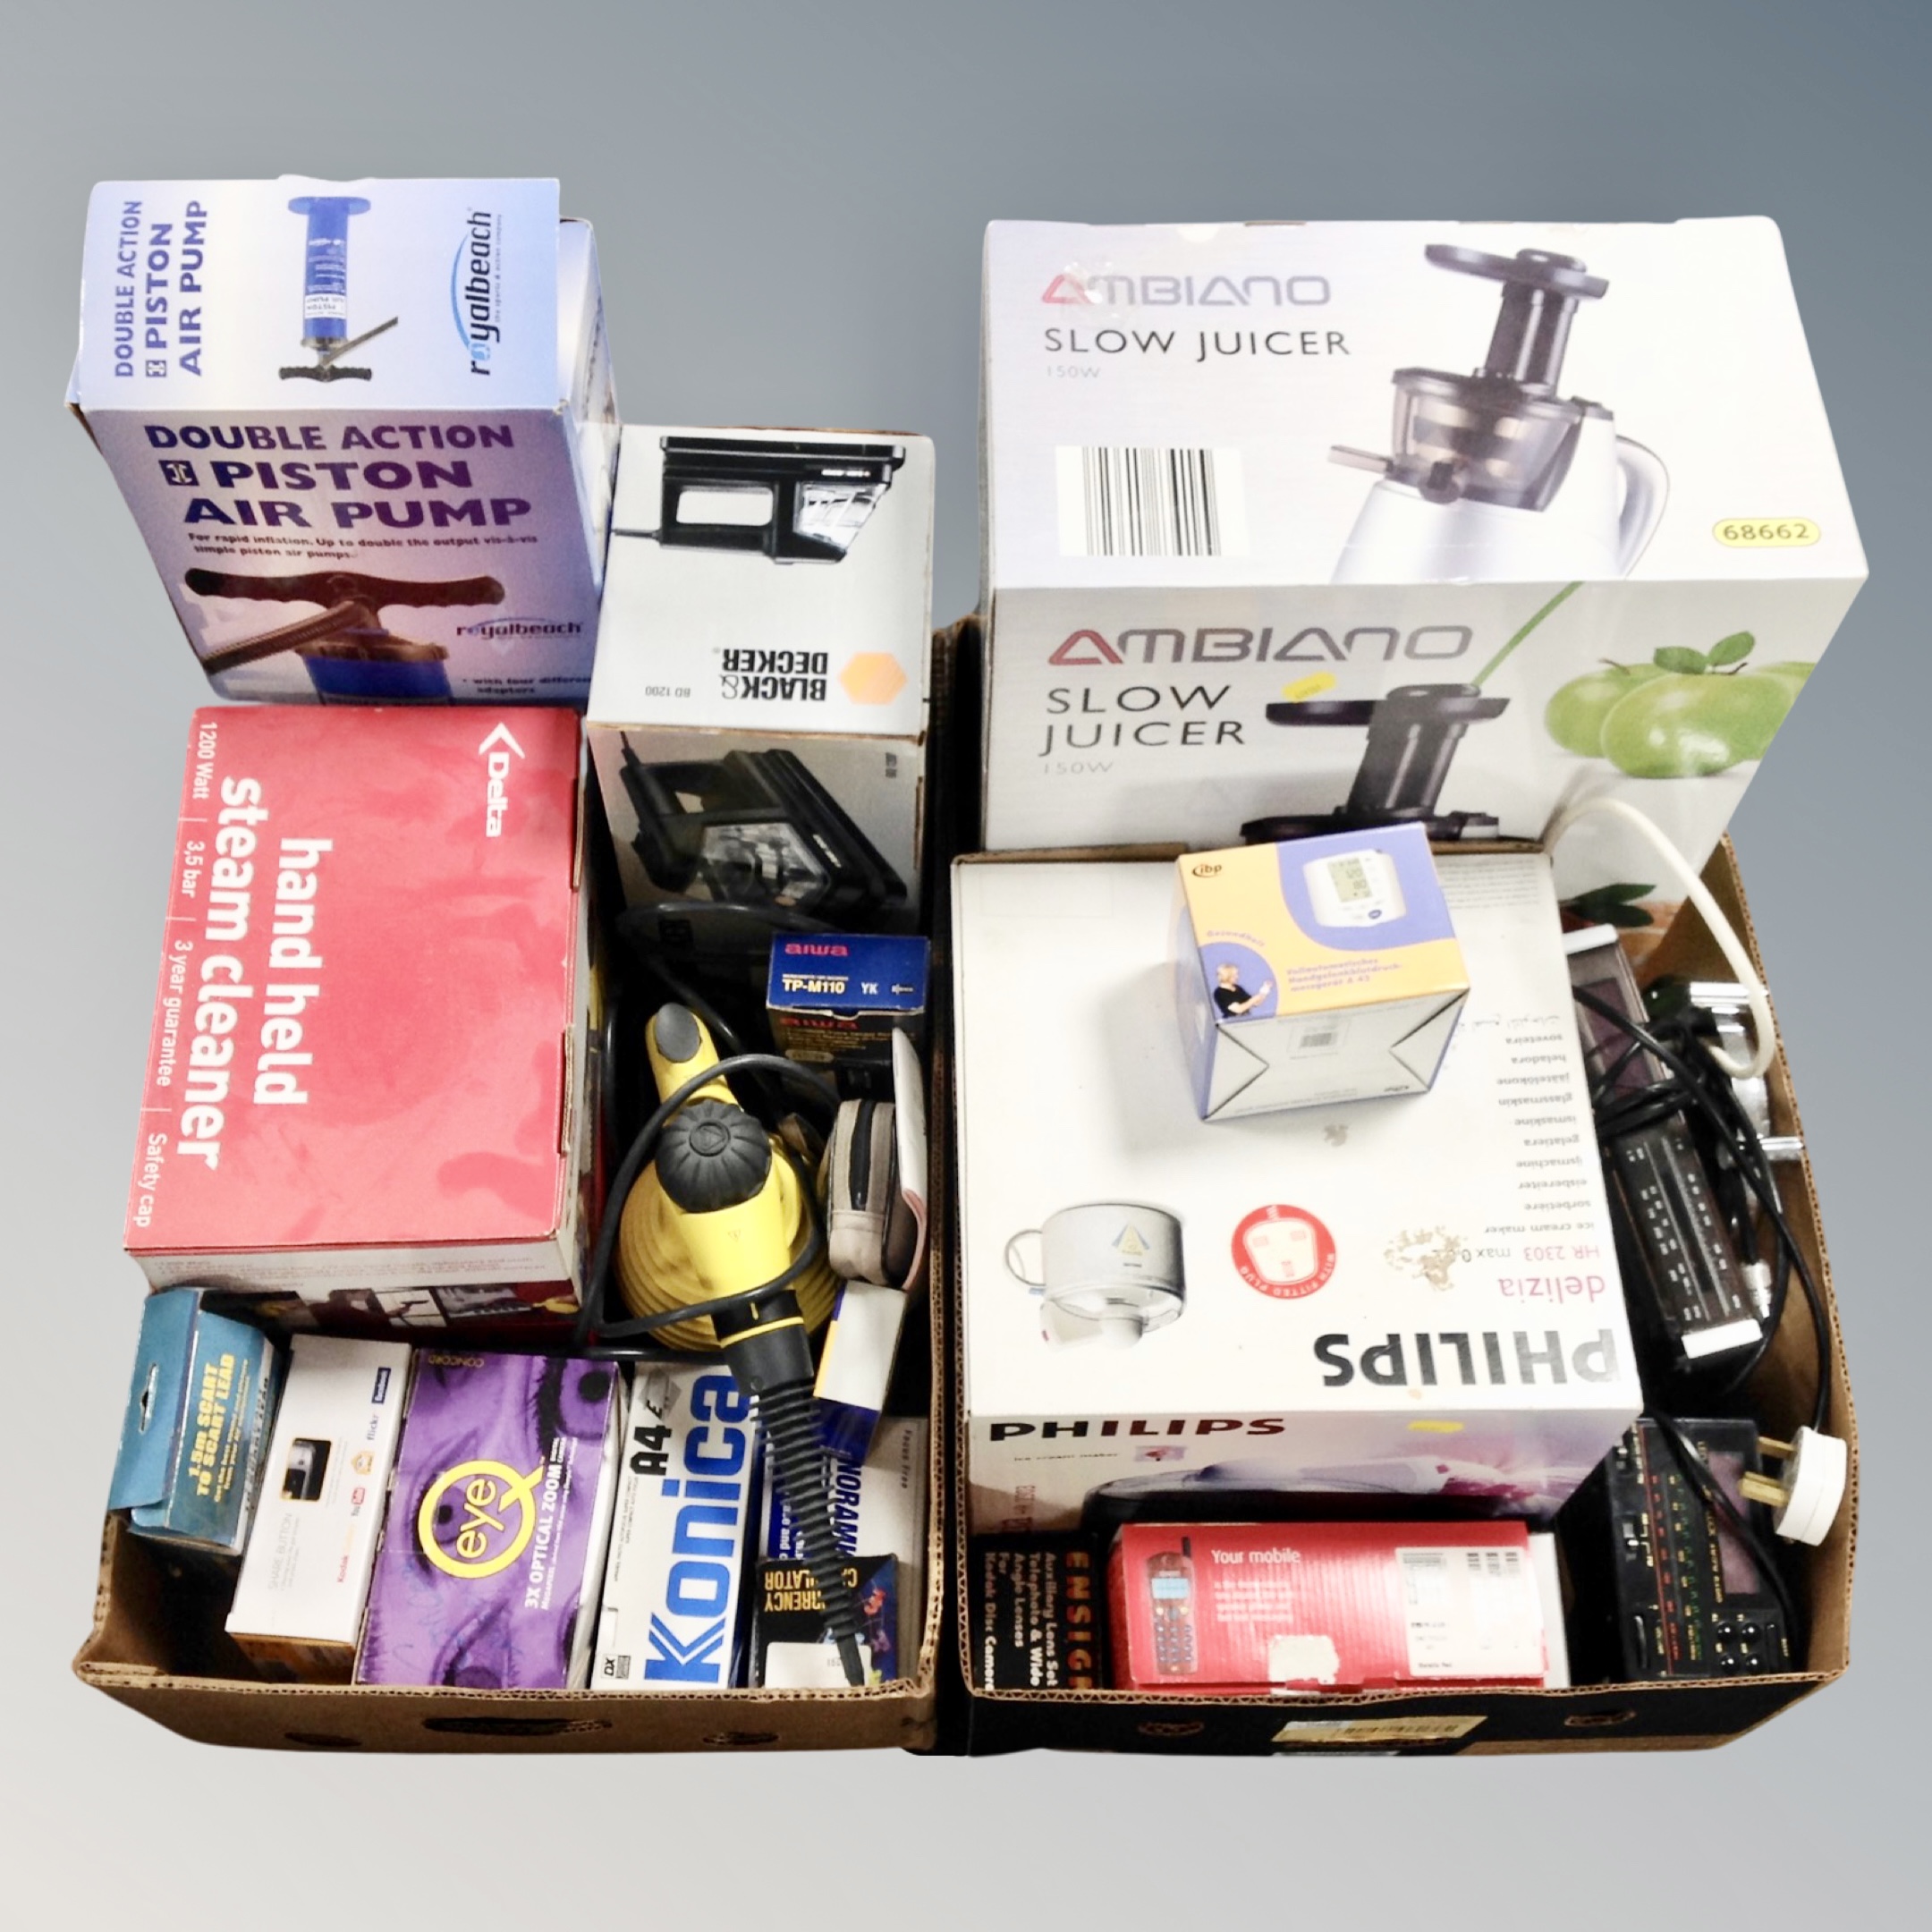 Two boxes of electricals, steam cleaners, air pumps, juicer, clock radios, cameras,